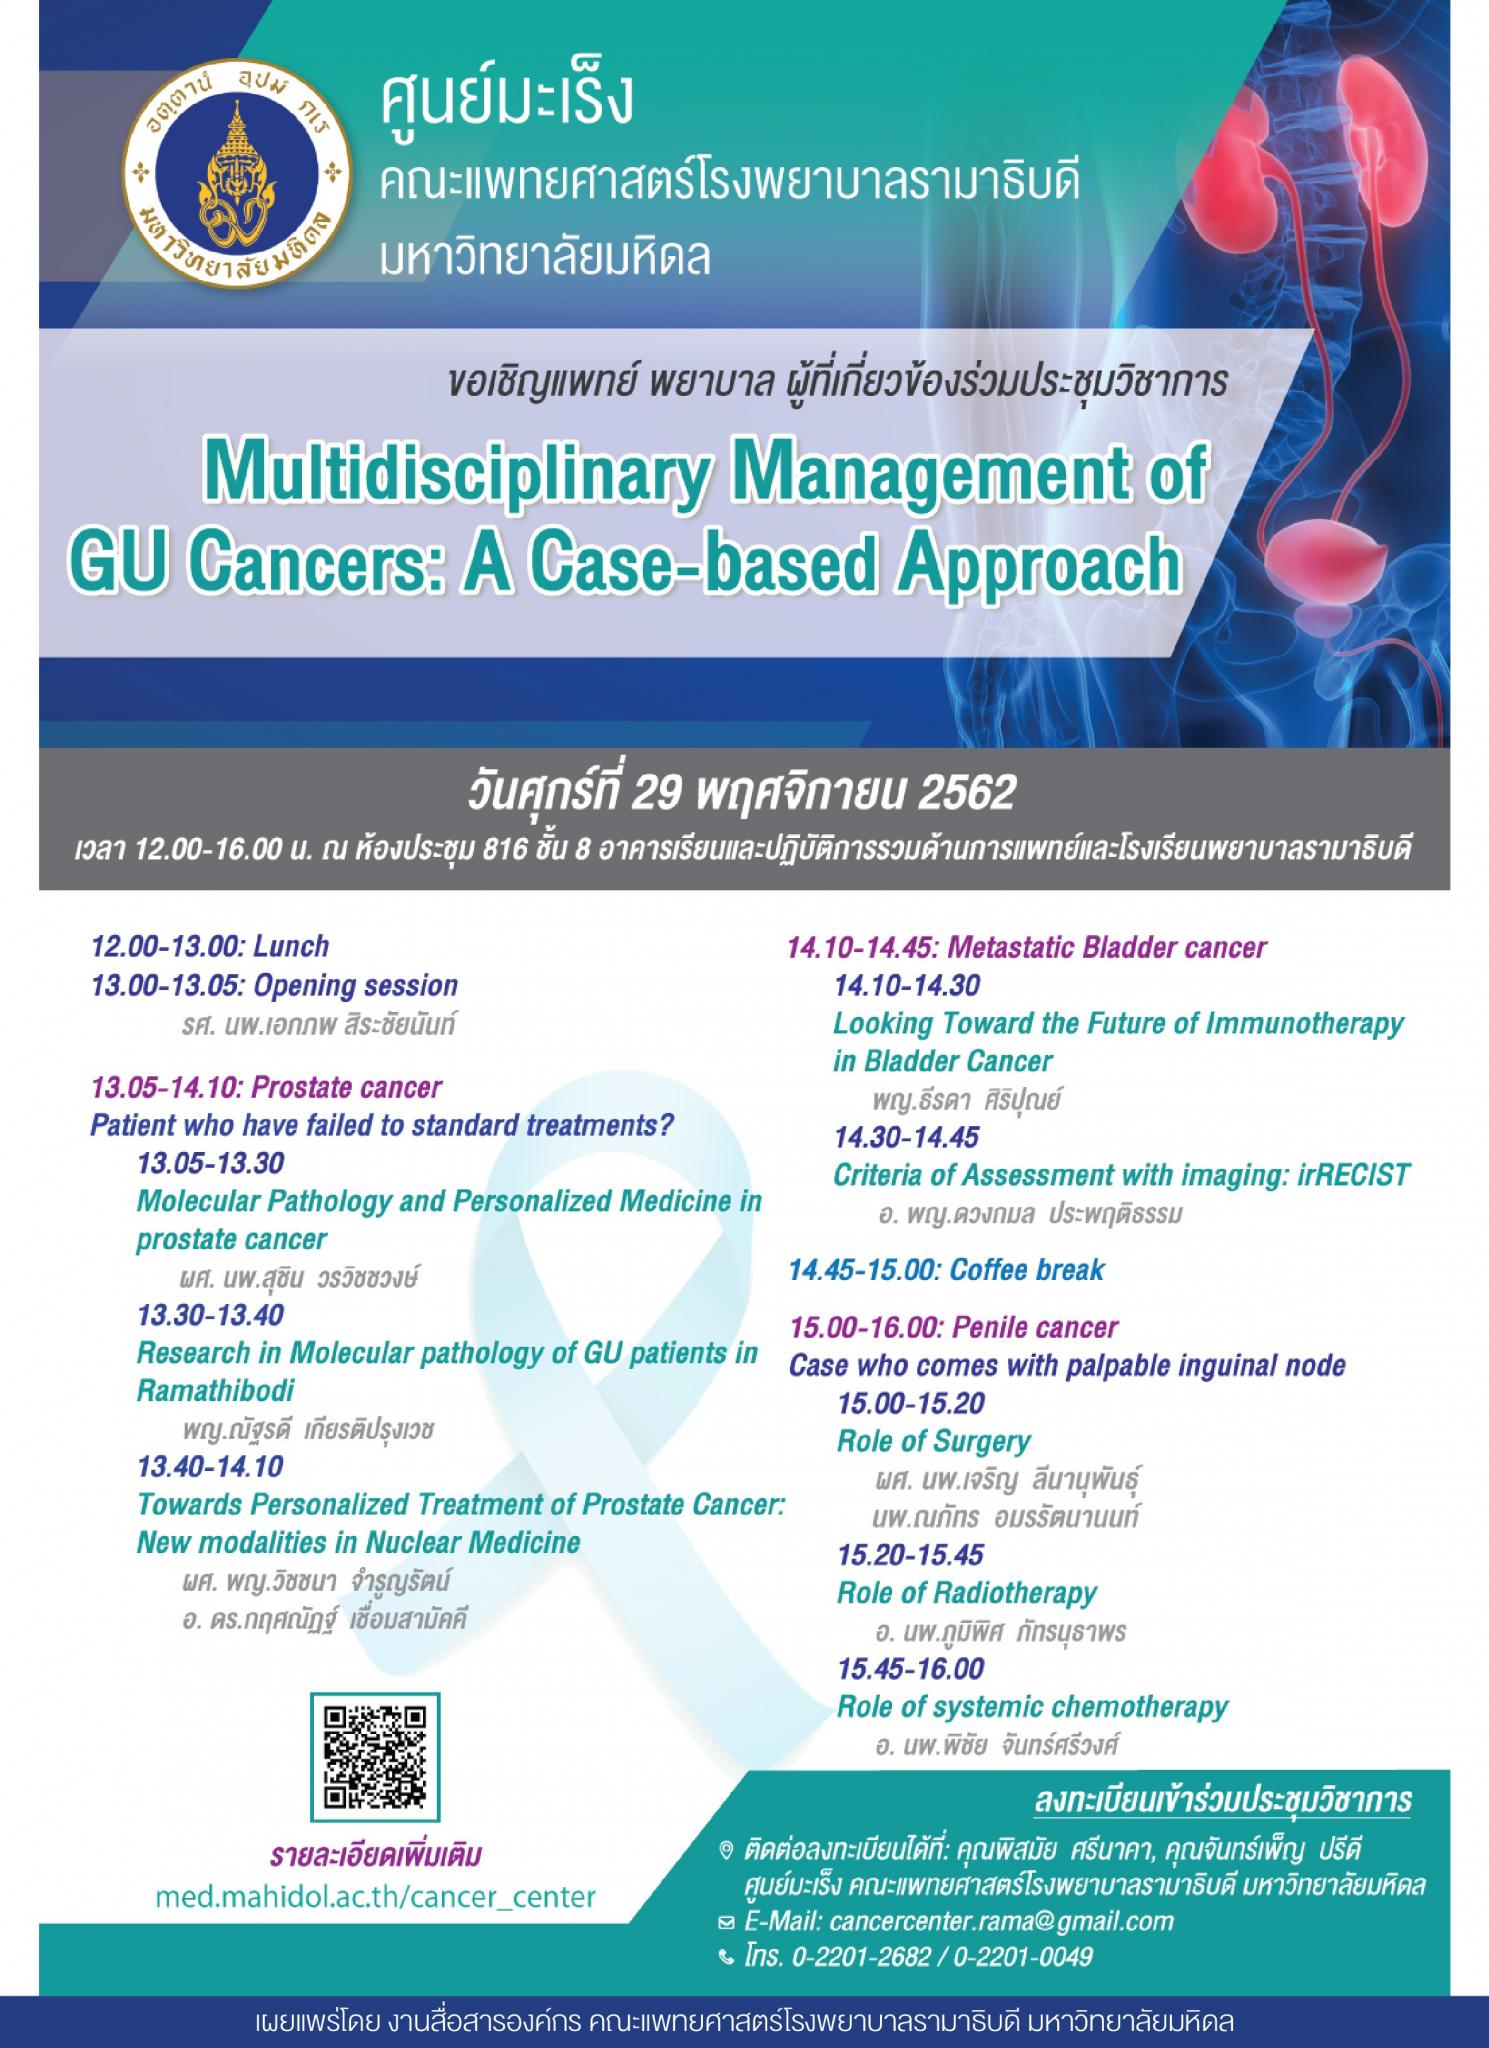 Multidisciplinary Management of GU Cancers: A Case-based Approach